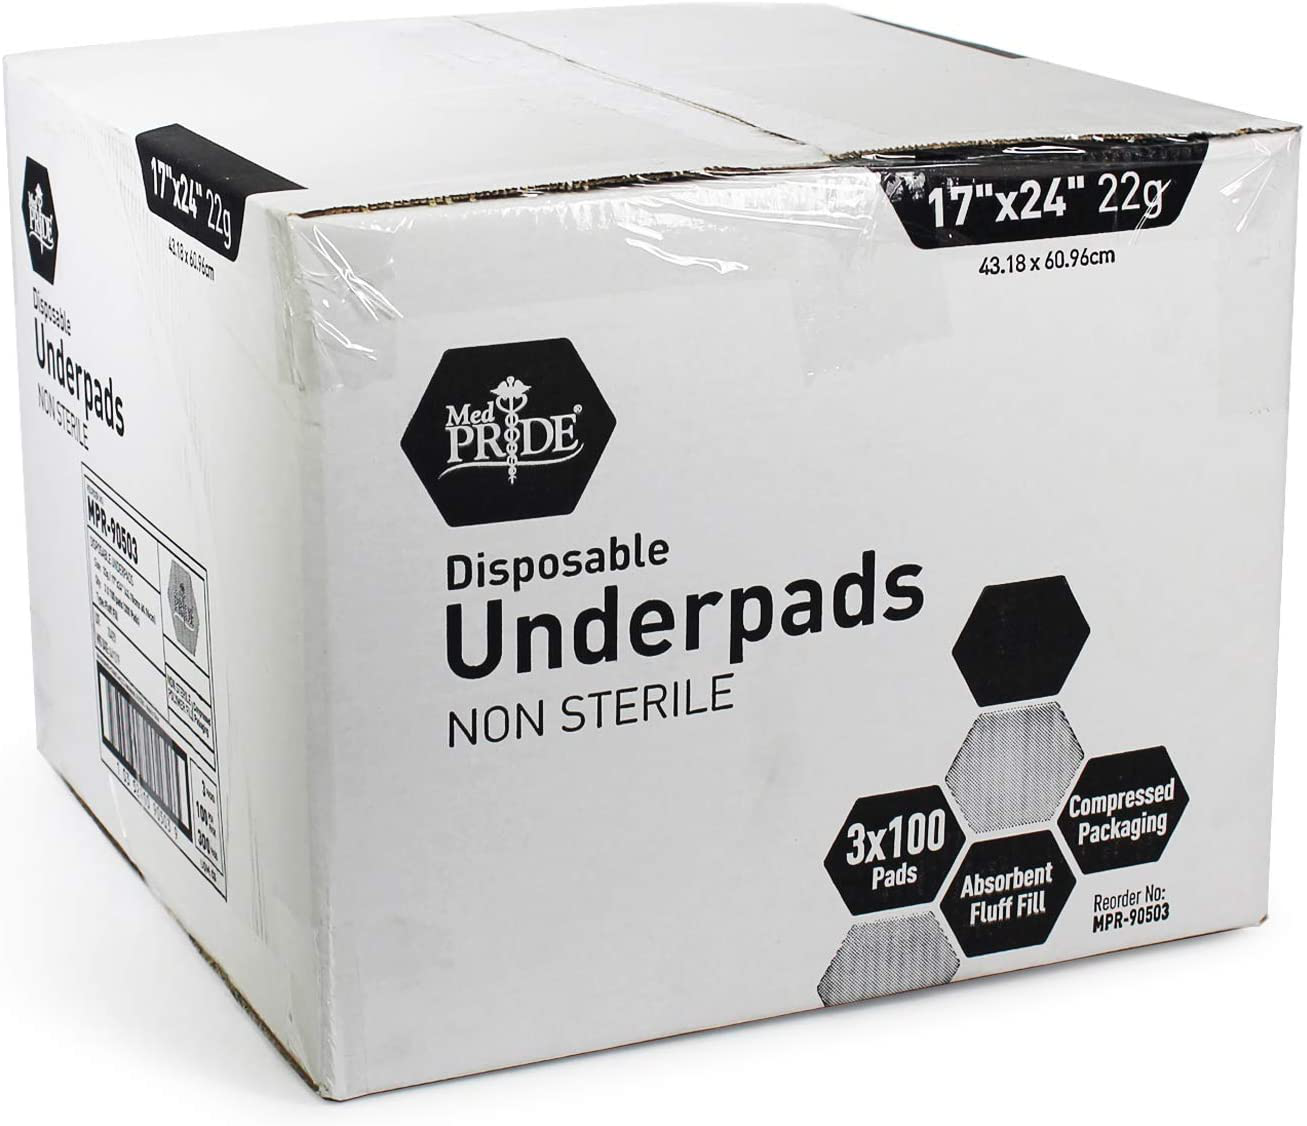 Medpride Disposable Underpads 17'' X 24'' (300-Count) Incontinence Pads, Bed Covers, Puppy Training | Thick, Super Absorbent Protection for Kids, Adults, Elderly | Liquid, Urine, Accidents